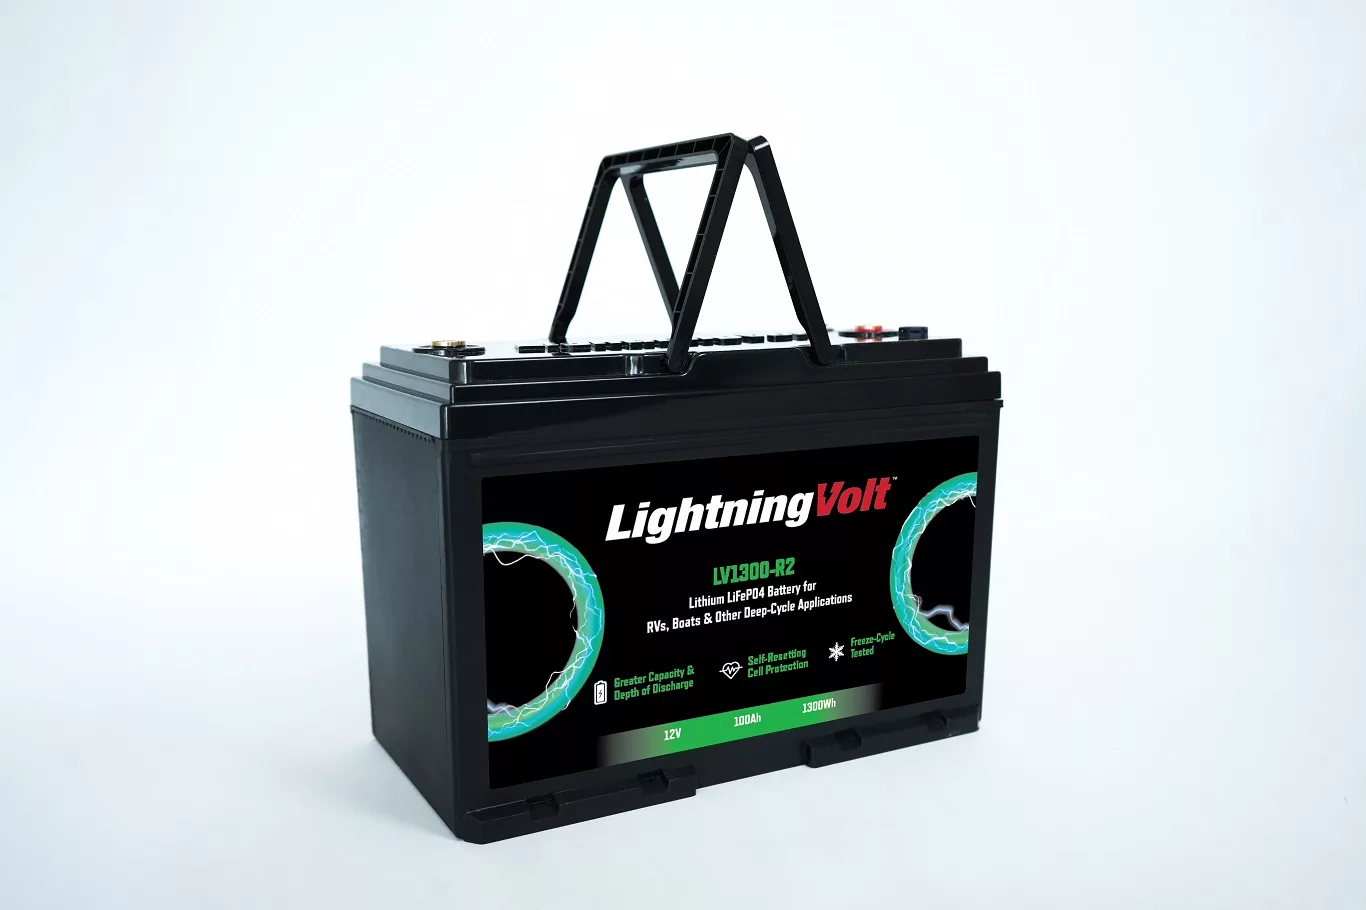 DL 12V 100Ah LiFePO4 Deep Cycle Lithium Battery for Trolling Motor Carts  Solar 10A LiFePO4 charger included